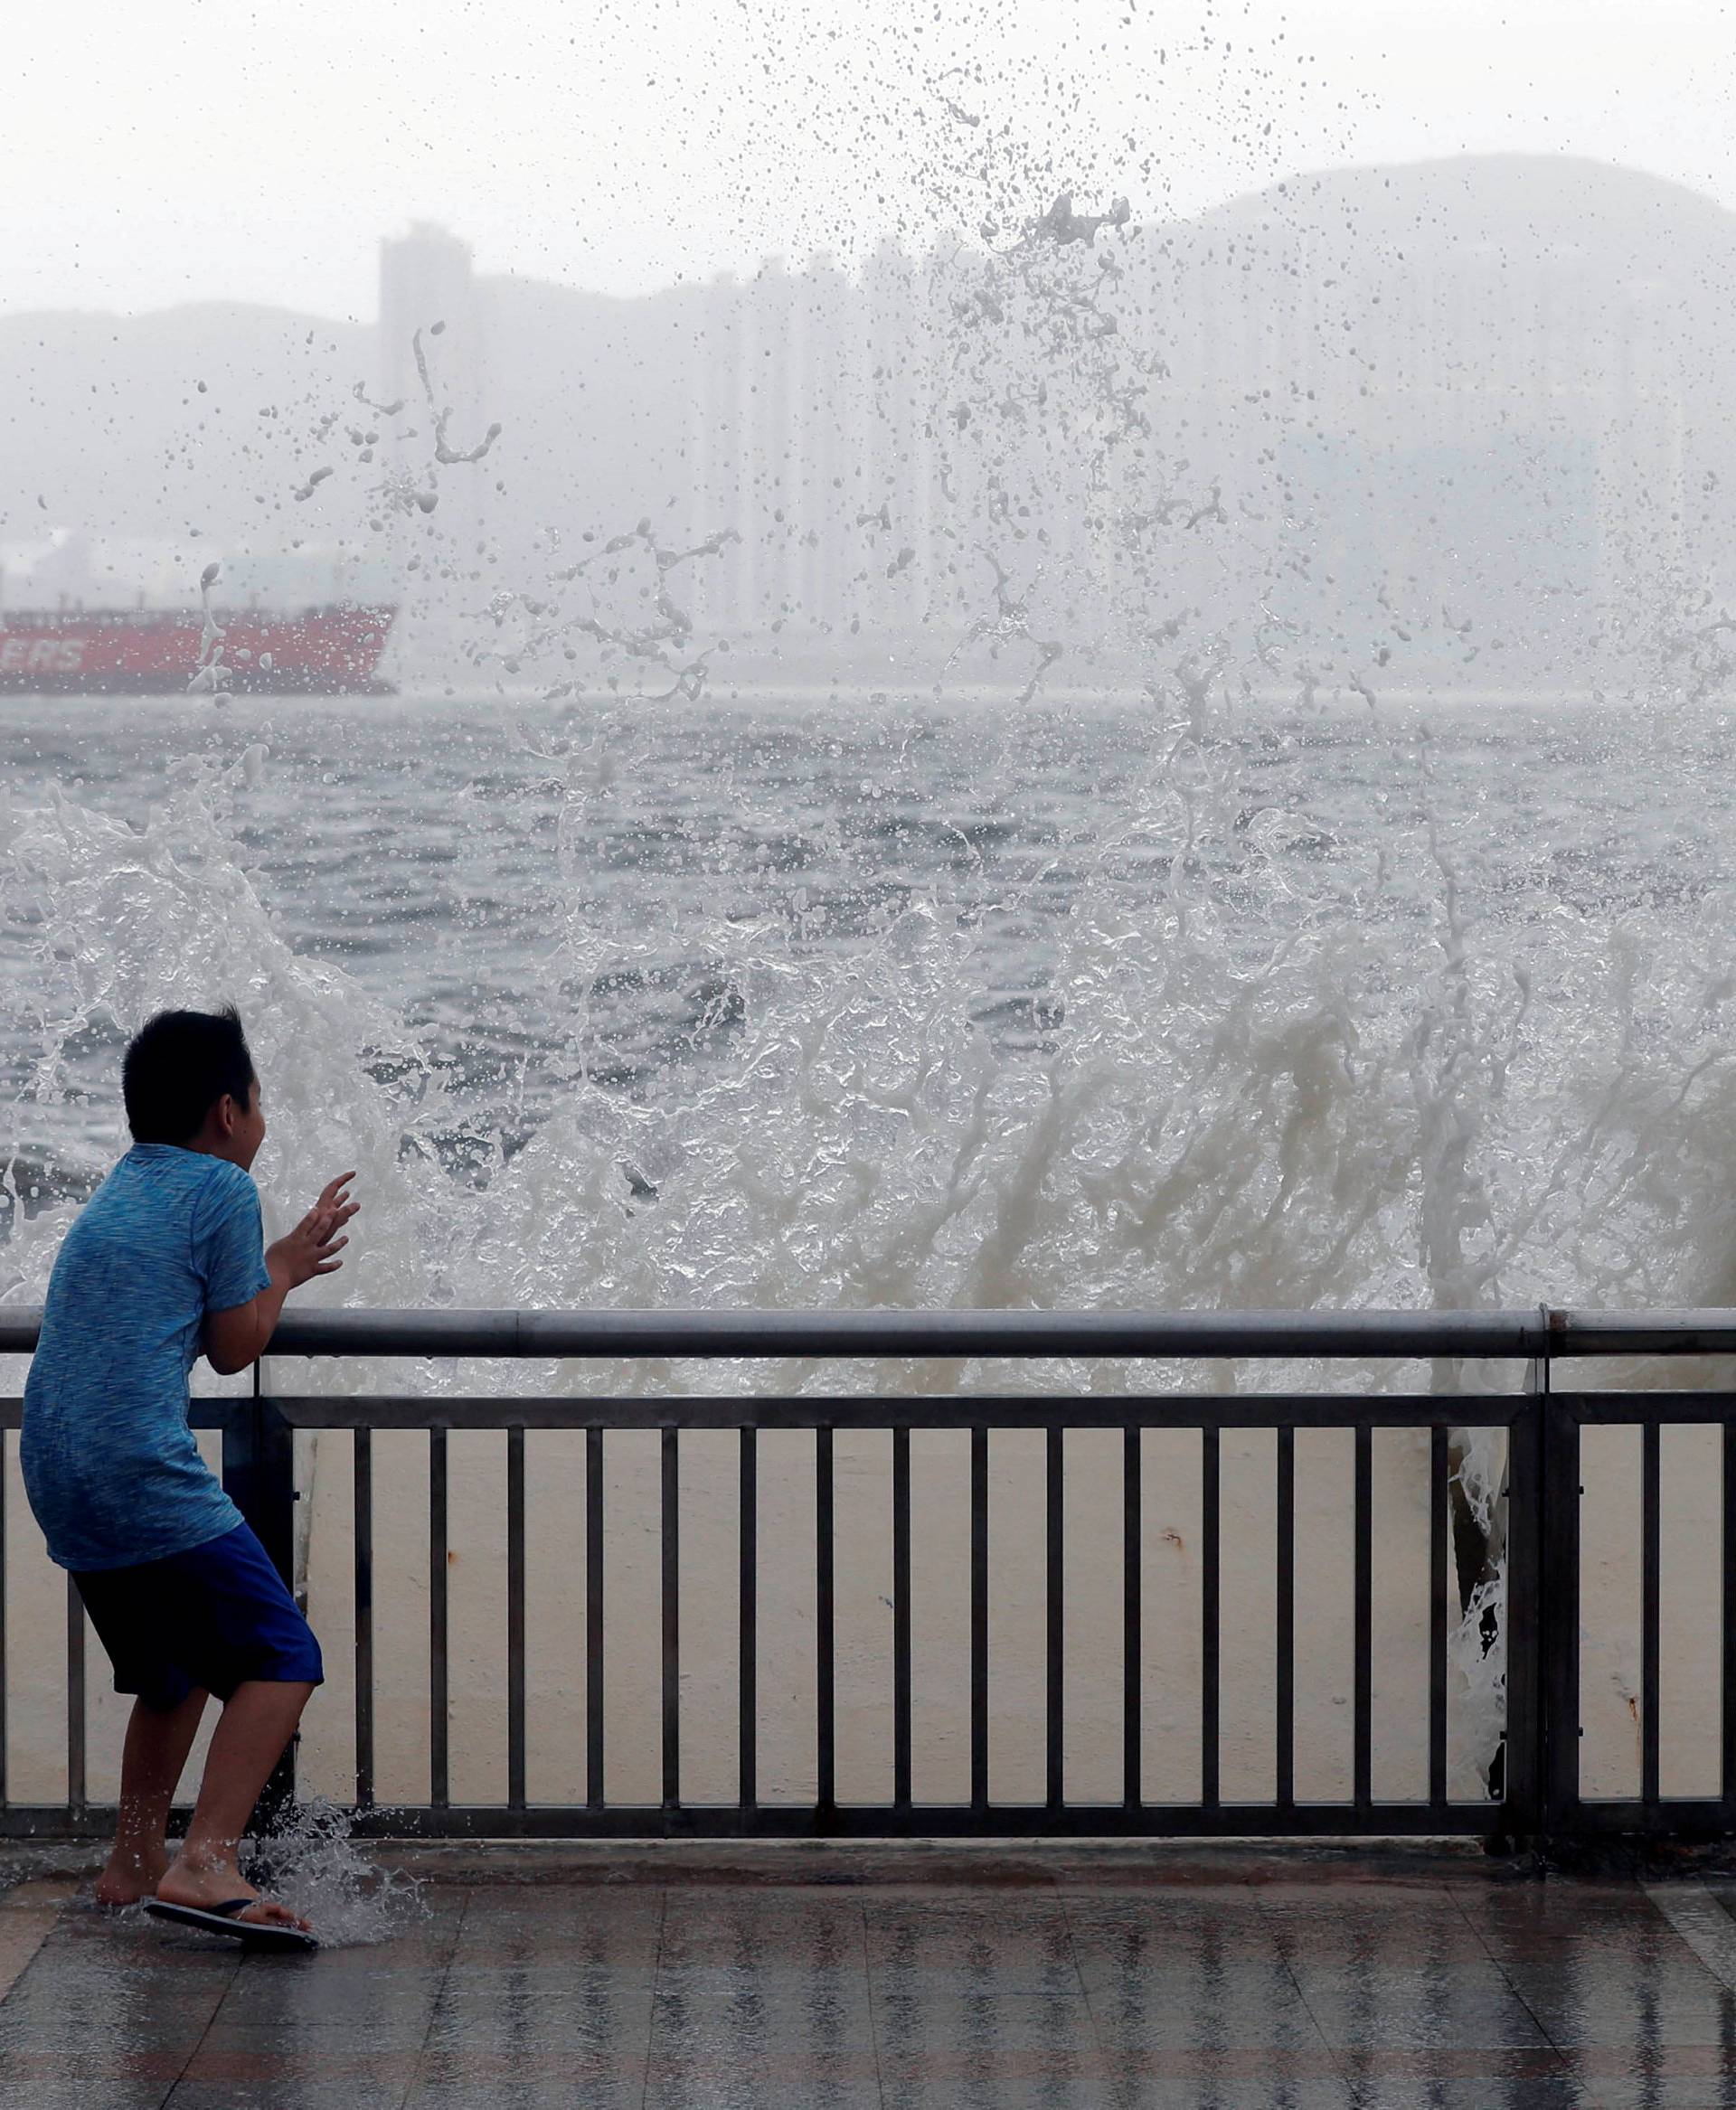 A child reacts after a big wave on a waterfront as Typhoon Hato hits Hong Kong